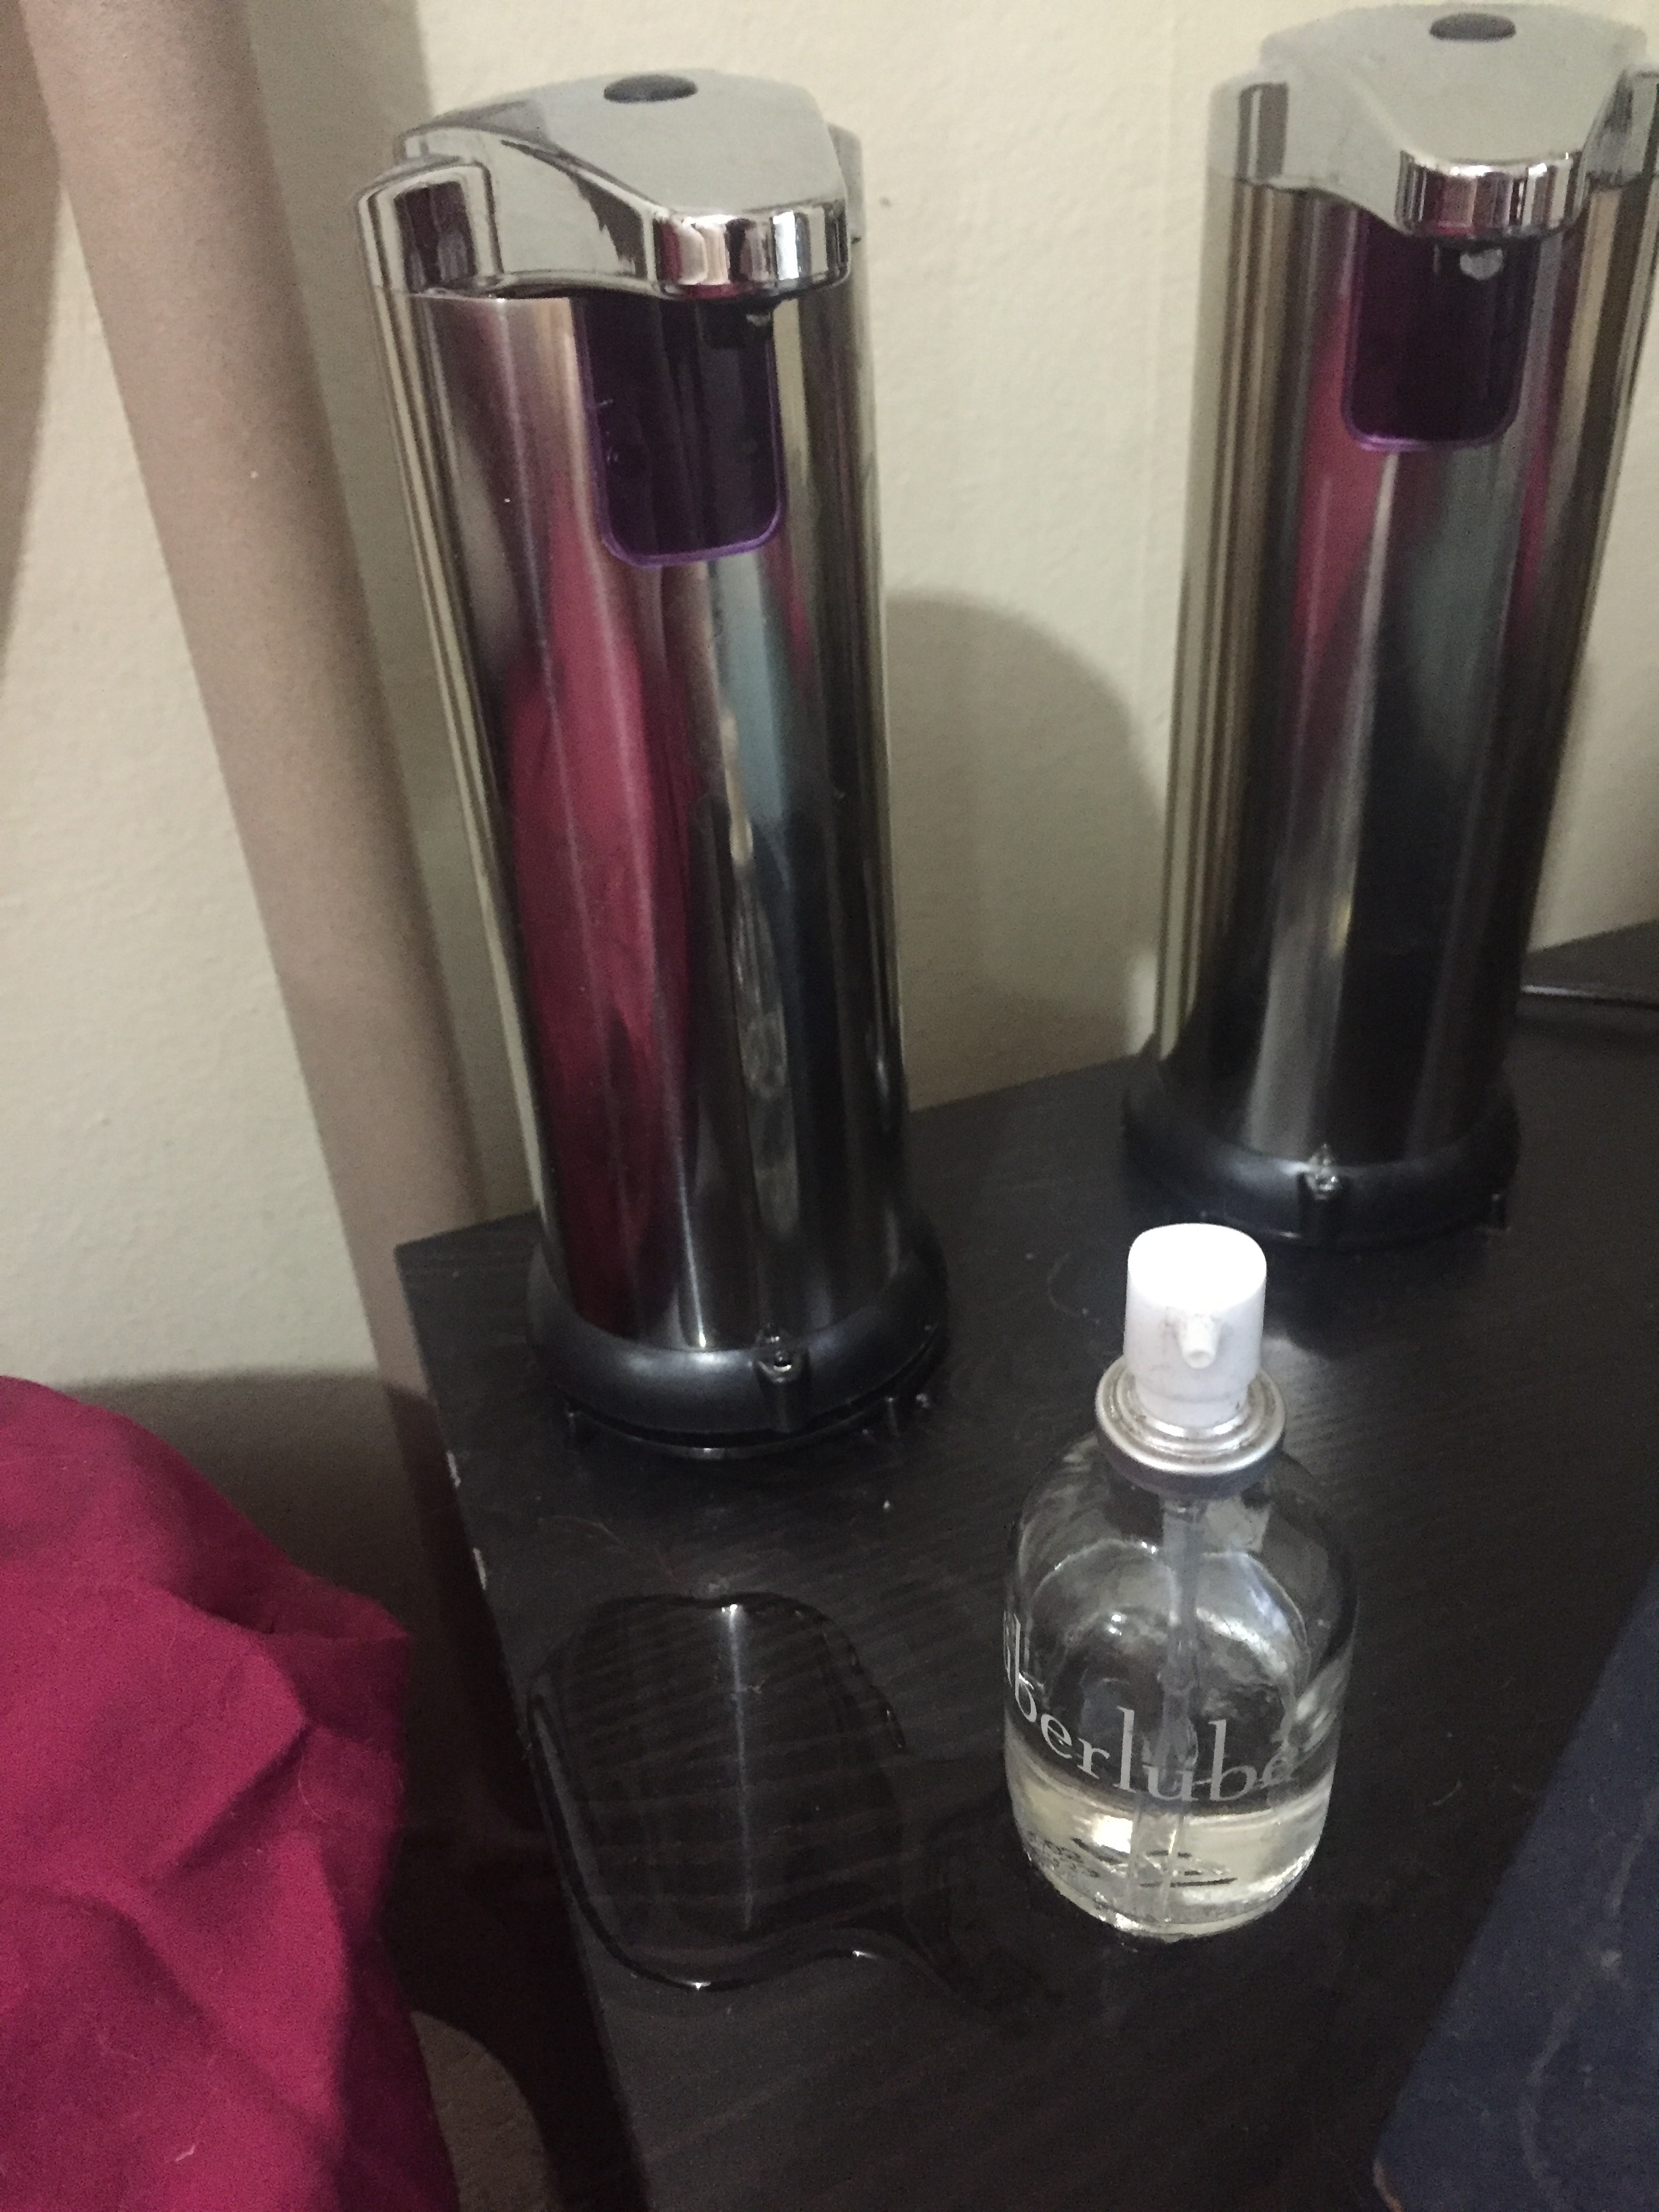 two silver automatic soap dispensers and a small glass pump bottle of uberlube